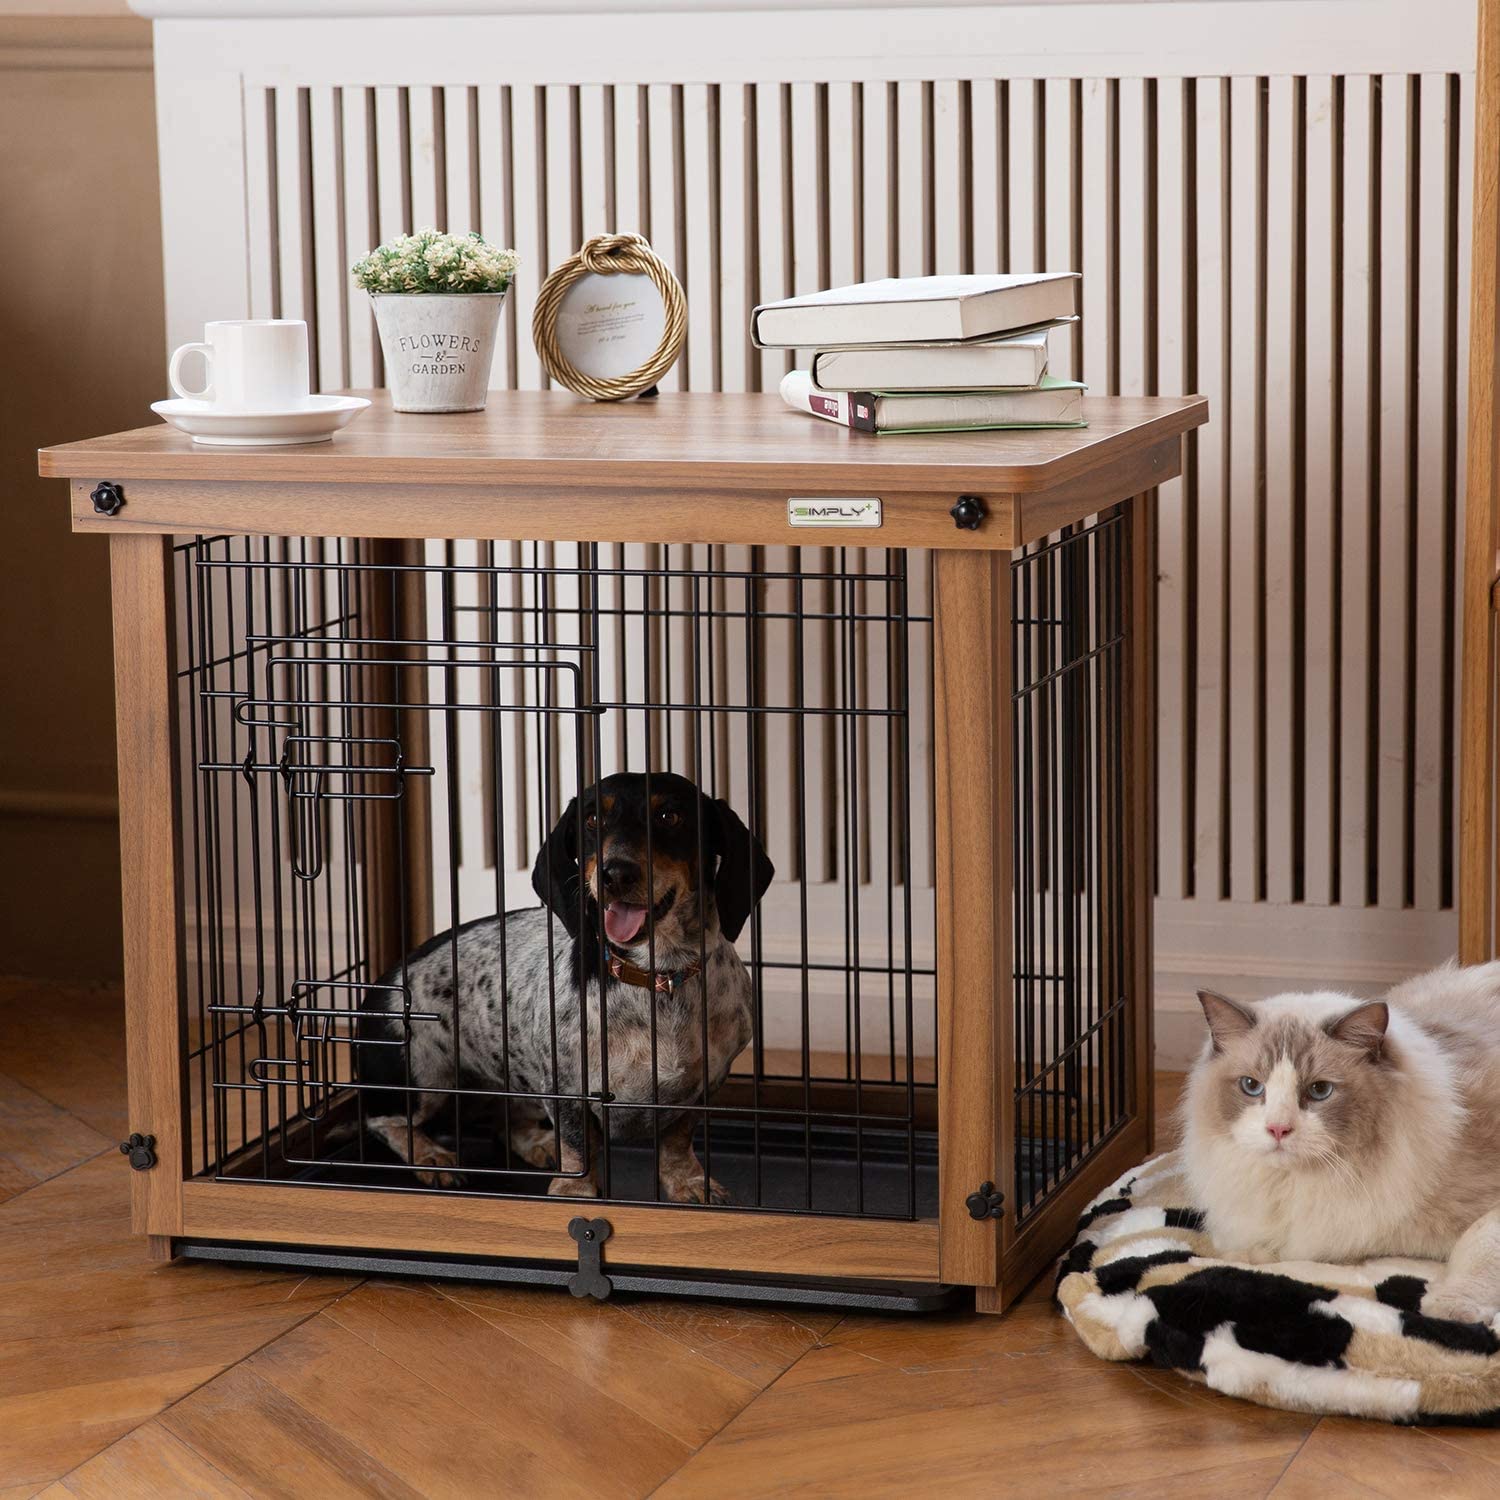 SIMPLY + Wooden Wire Dog Cage, Dog Crate End Table, Pet Crate Dog Kennel, Dog House with Dog Pad Side Furniture Table for Small Pets, Chew-Proof